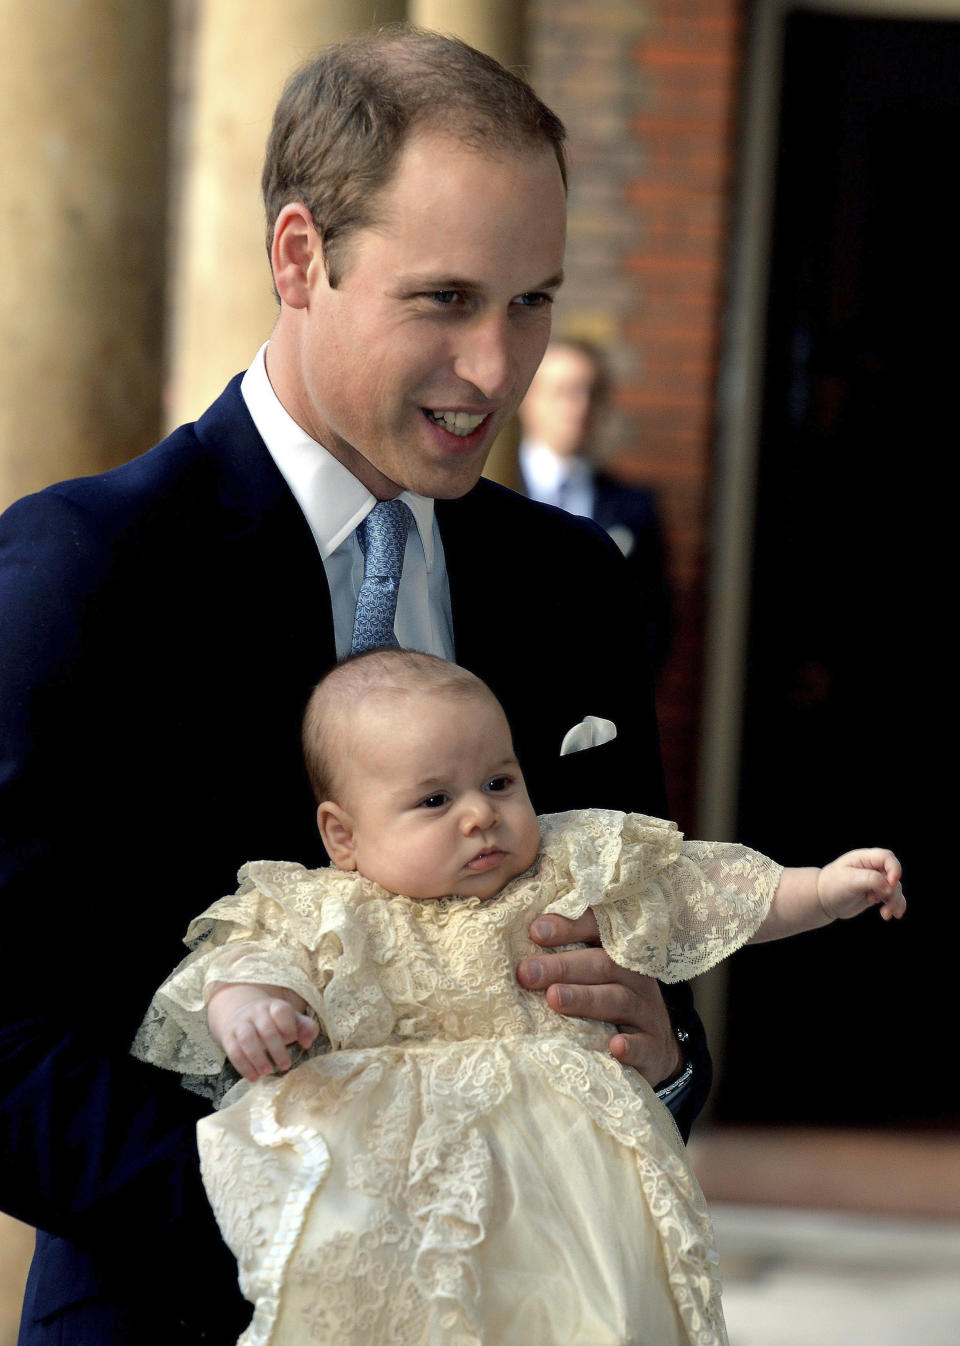 FILE - Britain's Prince William, holds his son Prince George as they arrive at Chapel Royal in St James's Palace in London, for the christening of the three month-old Prince Wednesday Oct. 23, 2013. The world watched as Prince William grew from a towheaded schoolboy to a dashing air-sea rescue pilot to a father of three. But as he turns 40 on Tuesday, June 21, 2022, William is making the biggest change yet: assuming an increasingly central role in the royal family as he prepares for his eventual accession to the throne. (John Stillwell/Pool Photo via AP, File)